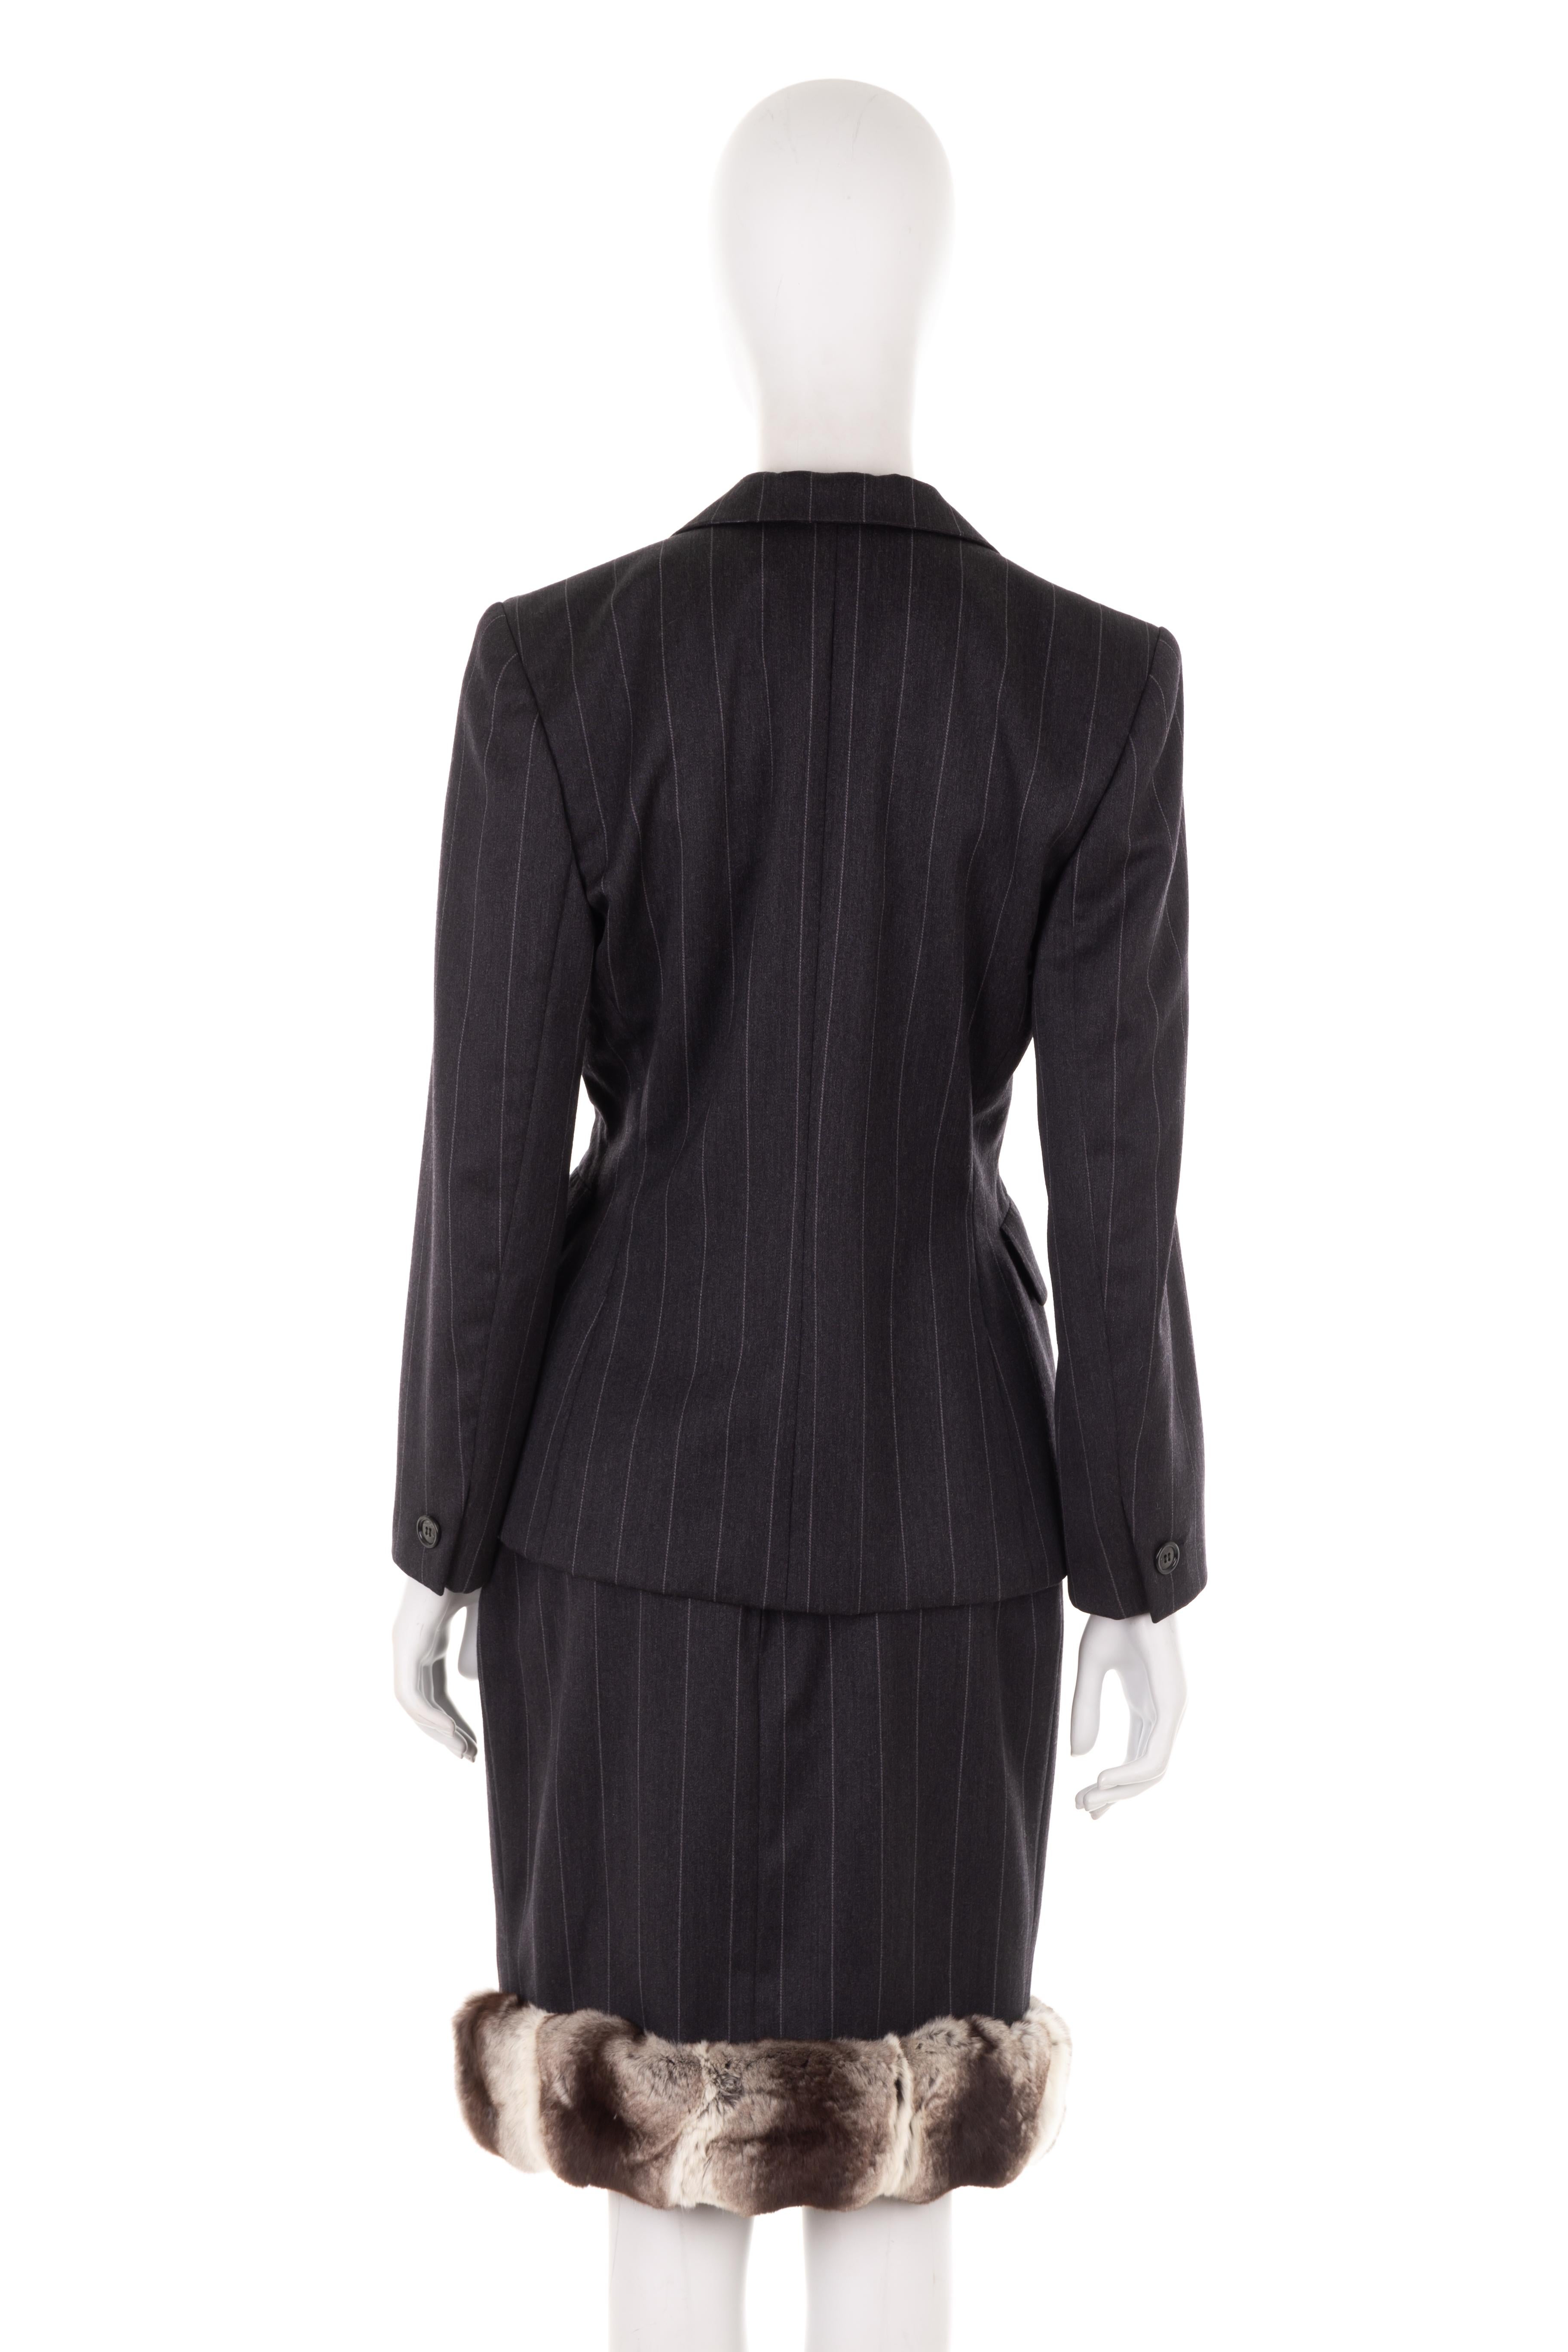 Christian Dior by Marc Bohan F/W 1987 grey pinstripe Chinchilla fur skirt suit In Excellent Condition For Sale In Rome, IT